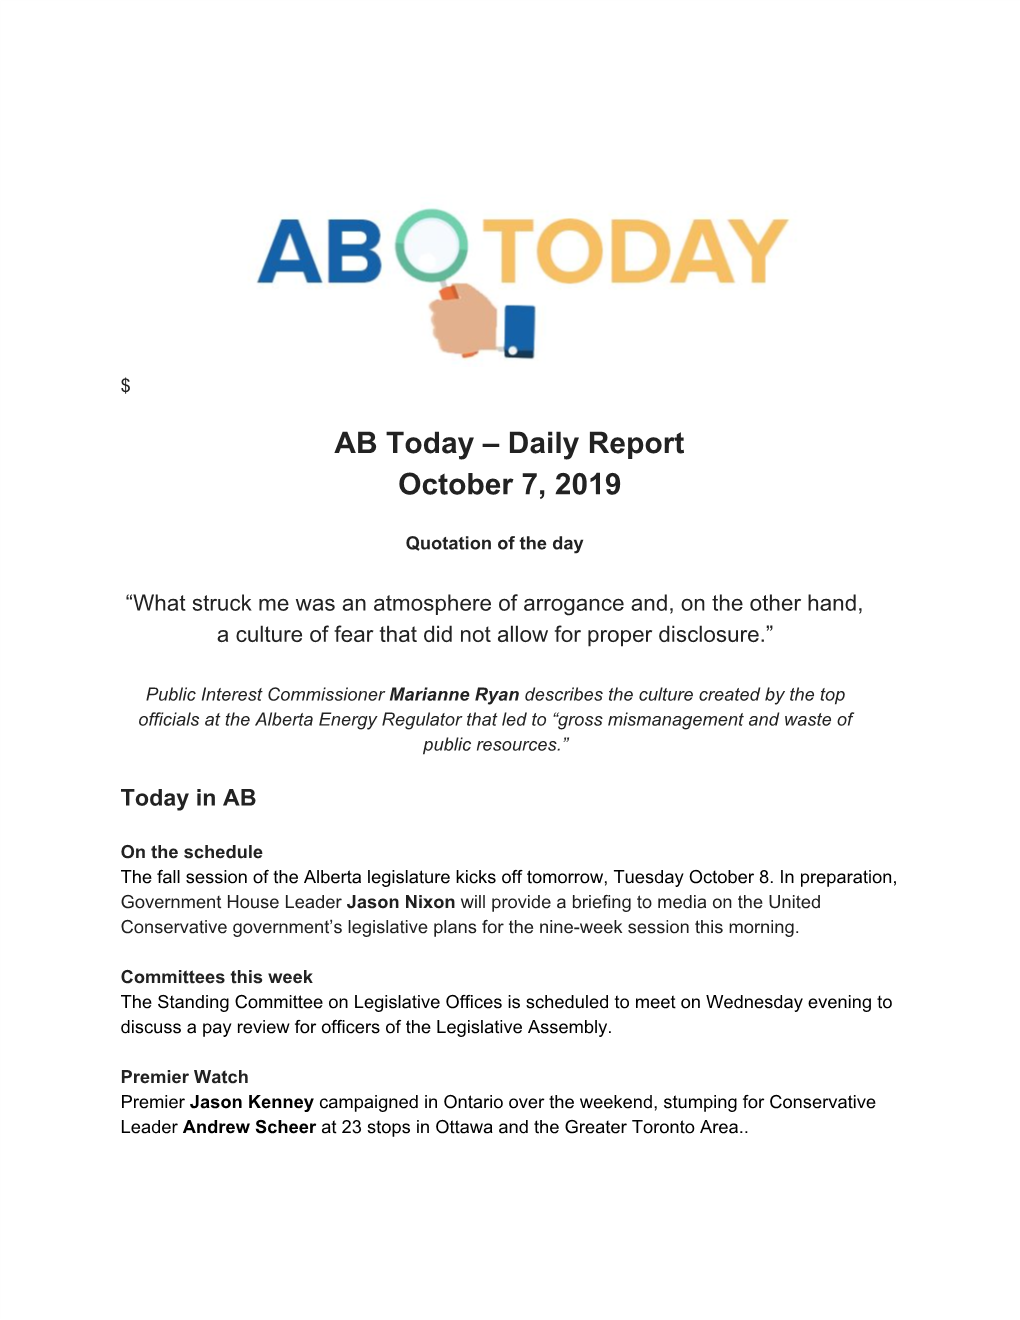 AB Today – Daily Report October 7, 2019